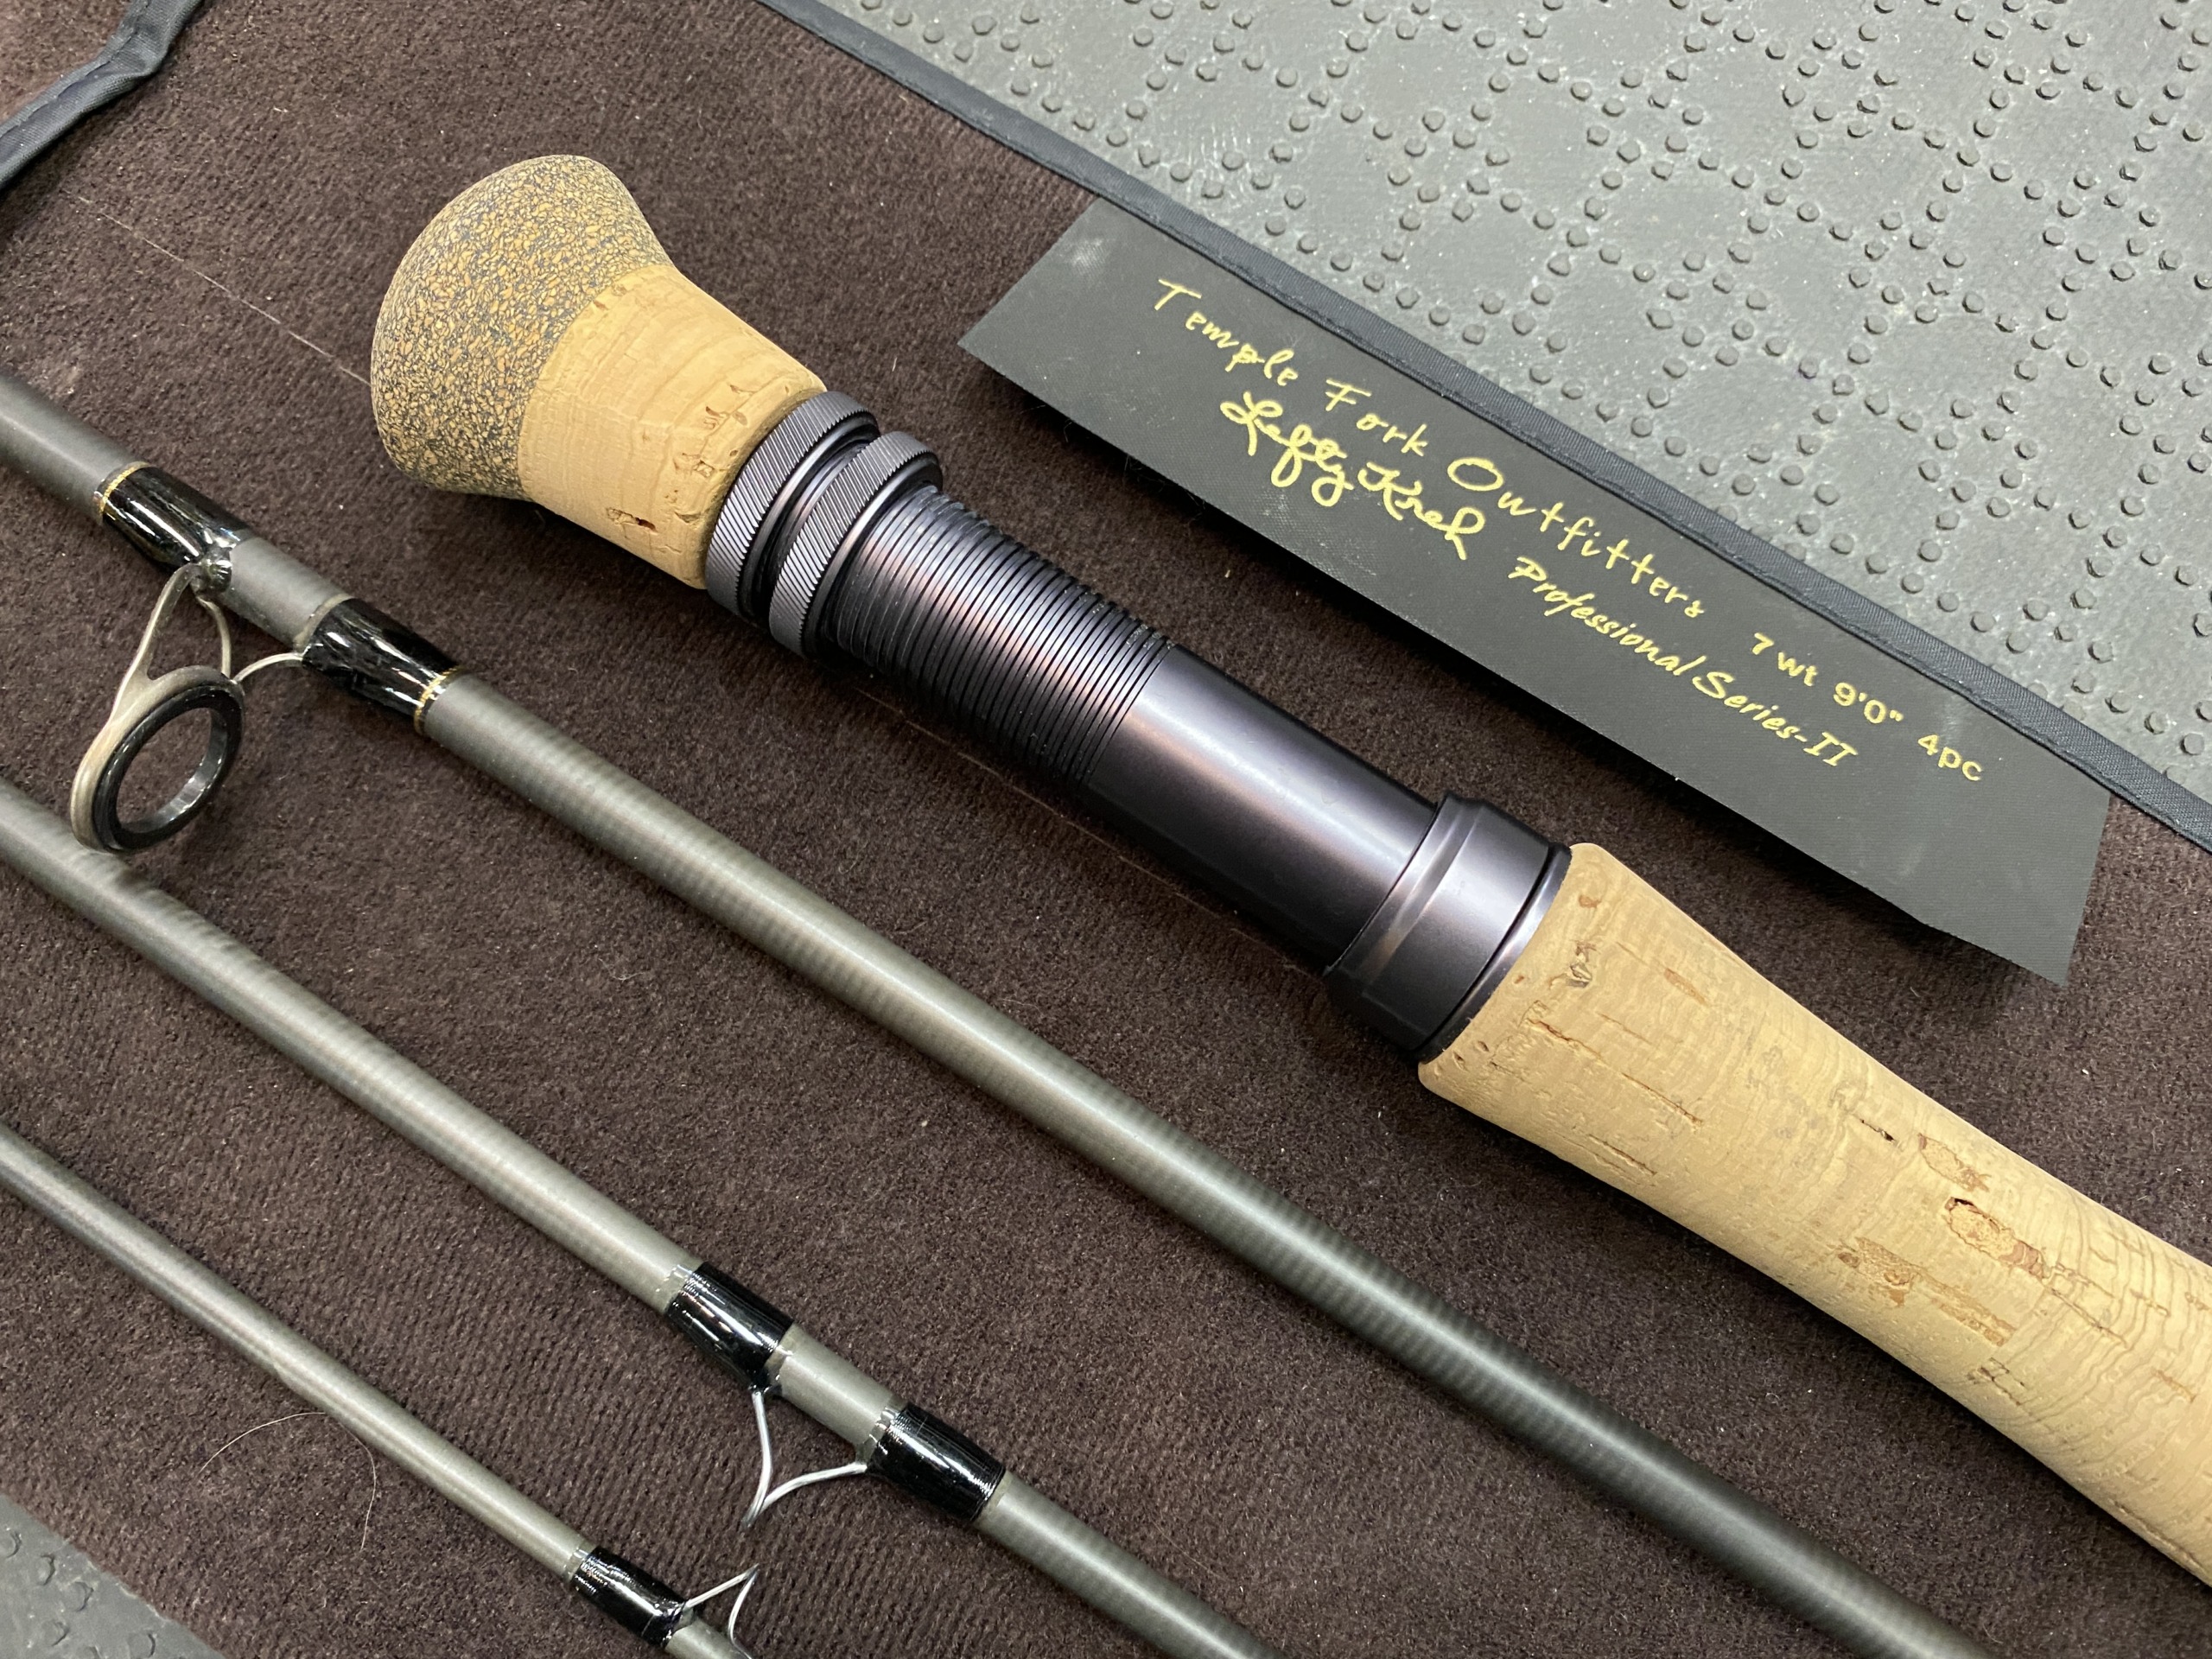 TFO - Temple Fork Outfitters - Lefty Kreh Pro Series II - 9' - 4Pc - 7Wt - Fly Rod - LIKE NEW! - $150